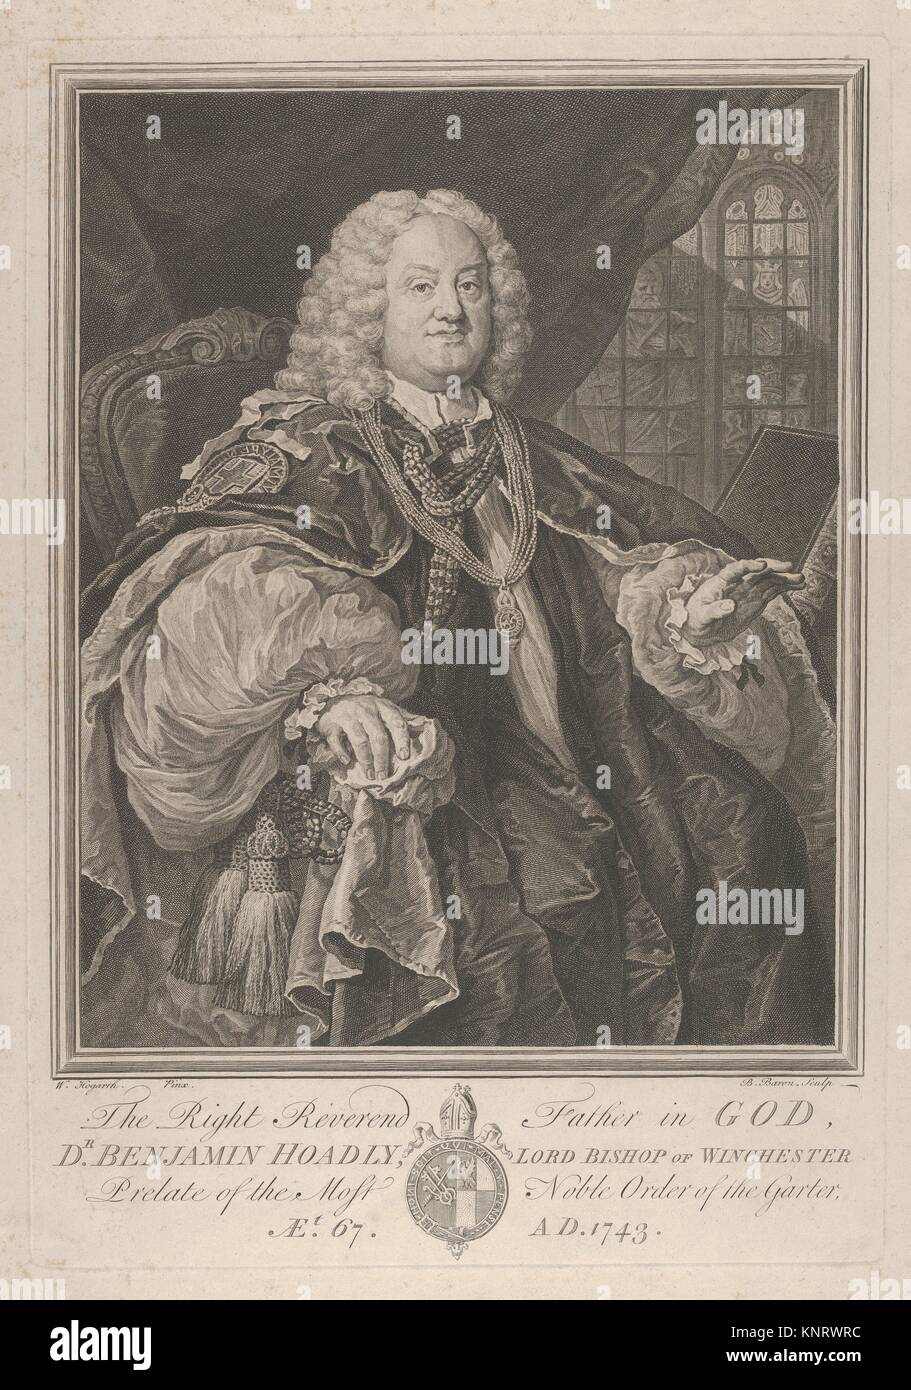 The Right Reverend Father in God, Dr. Benjamin Hoadly, Lord Bishop of Winchester, Prelate of the Most Noble Order of the Garter, Aet. 67. A.D. 1743. Stock Photo